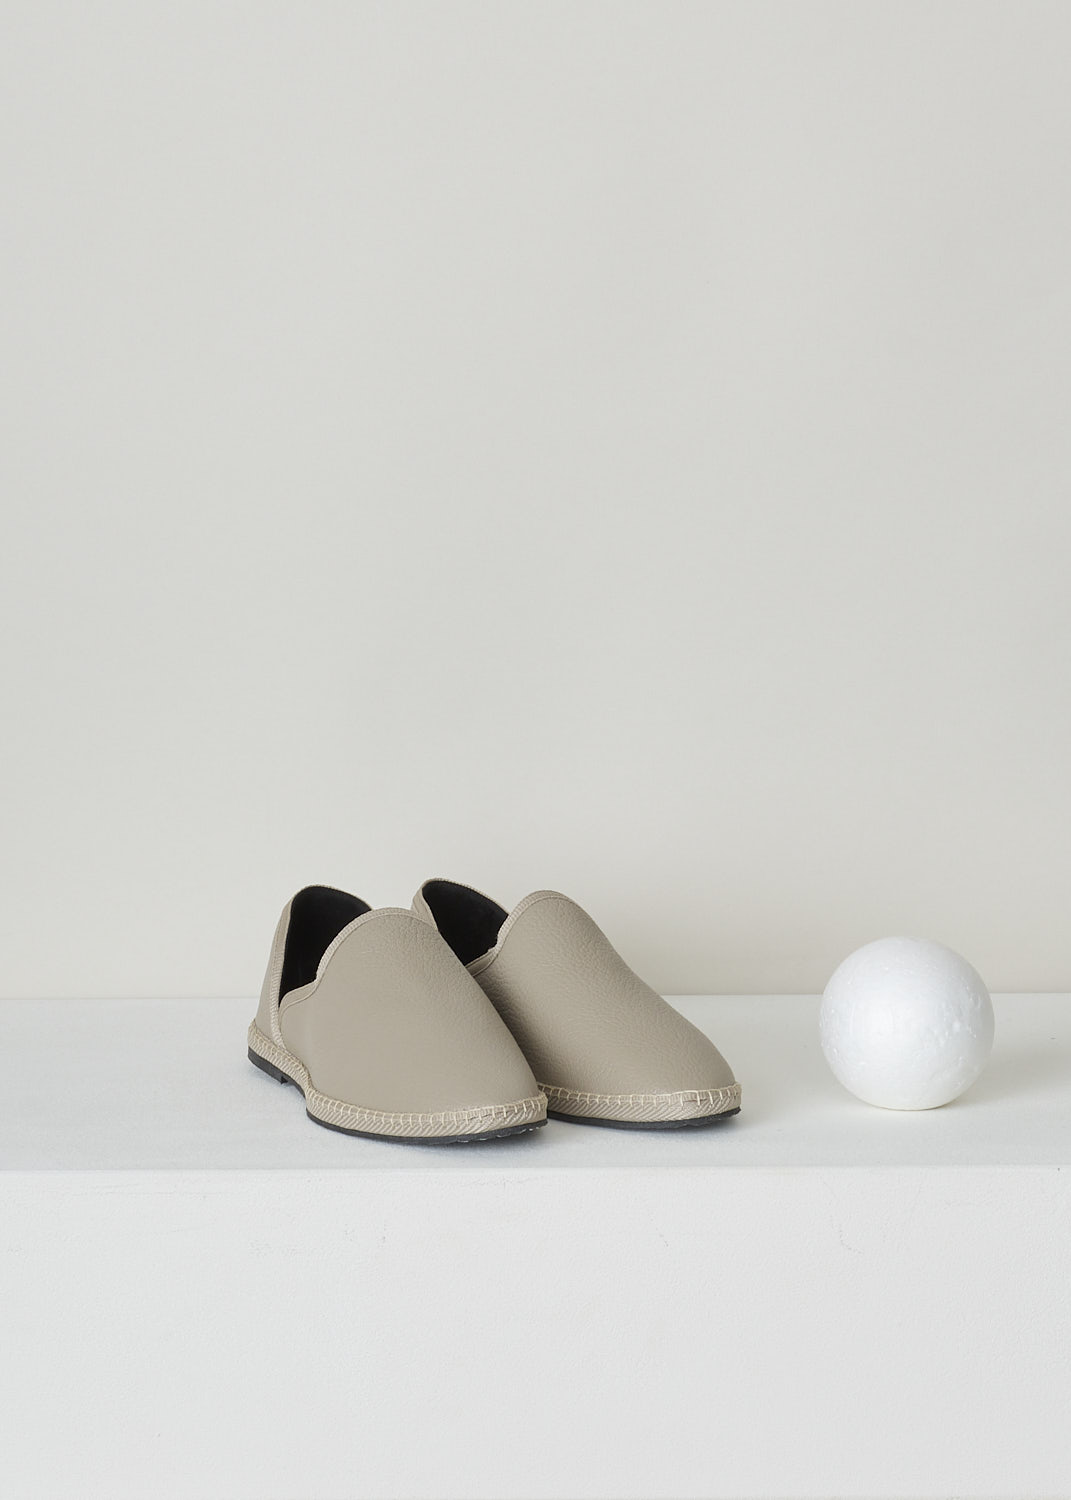 THE ROW, GREY GRAINED LEATHER SLIPPERS, FRIULANE_SLIPPER_NUAGE_F1146A_L36_NUA, Grey, Front, Minimalistic grey colored grain leather slipper. The slip-in model features a rounded toe vamp. 
